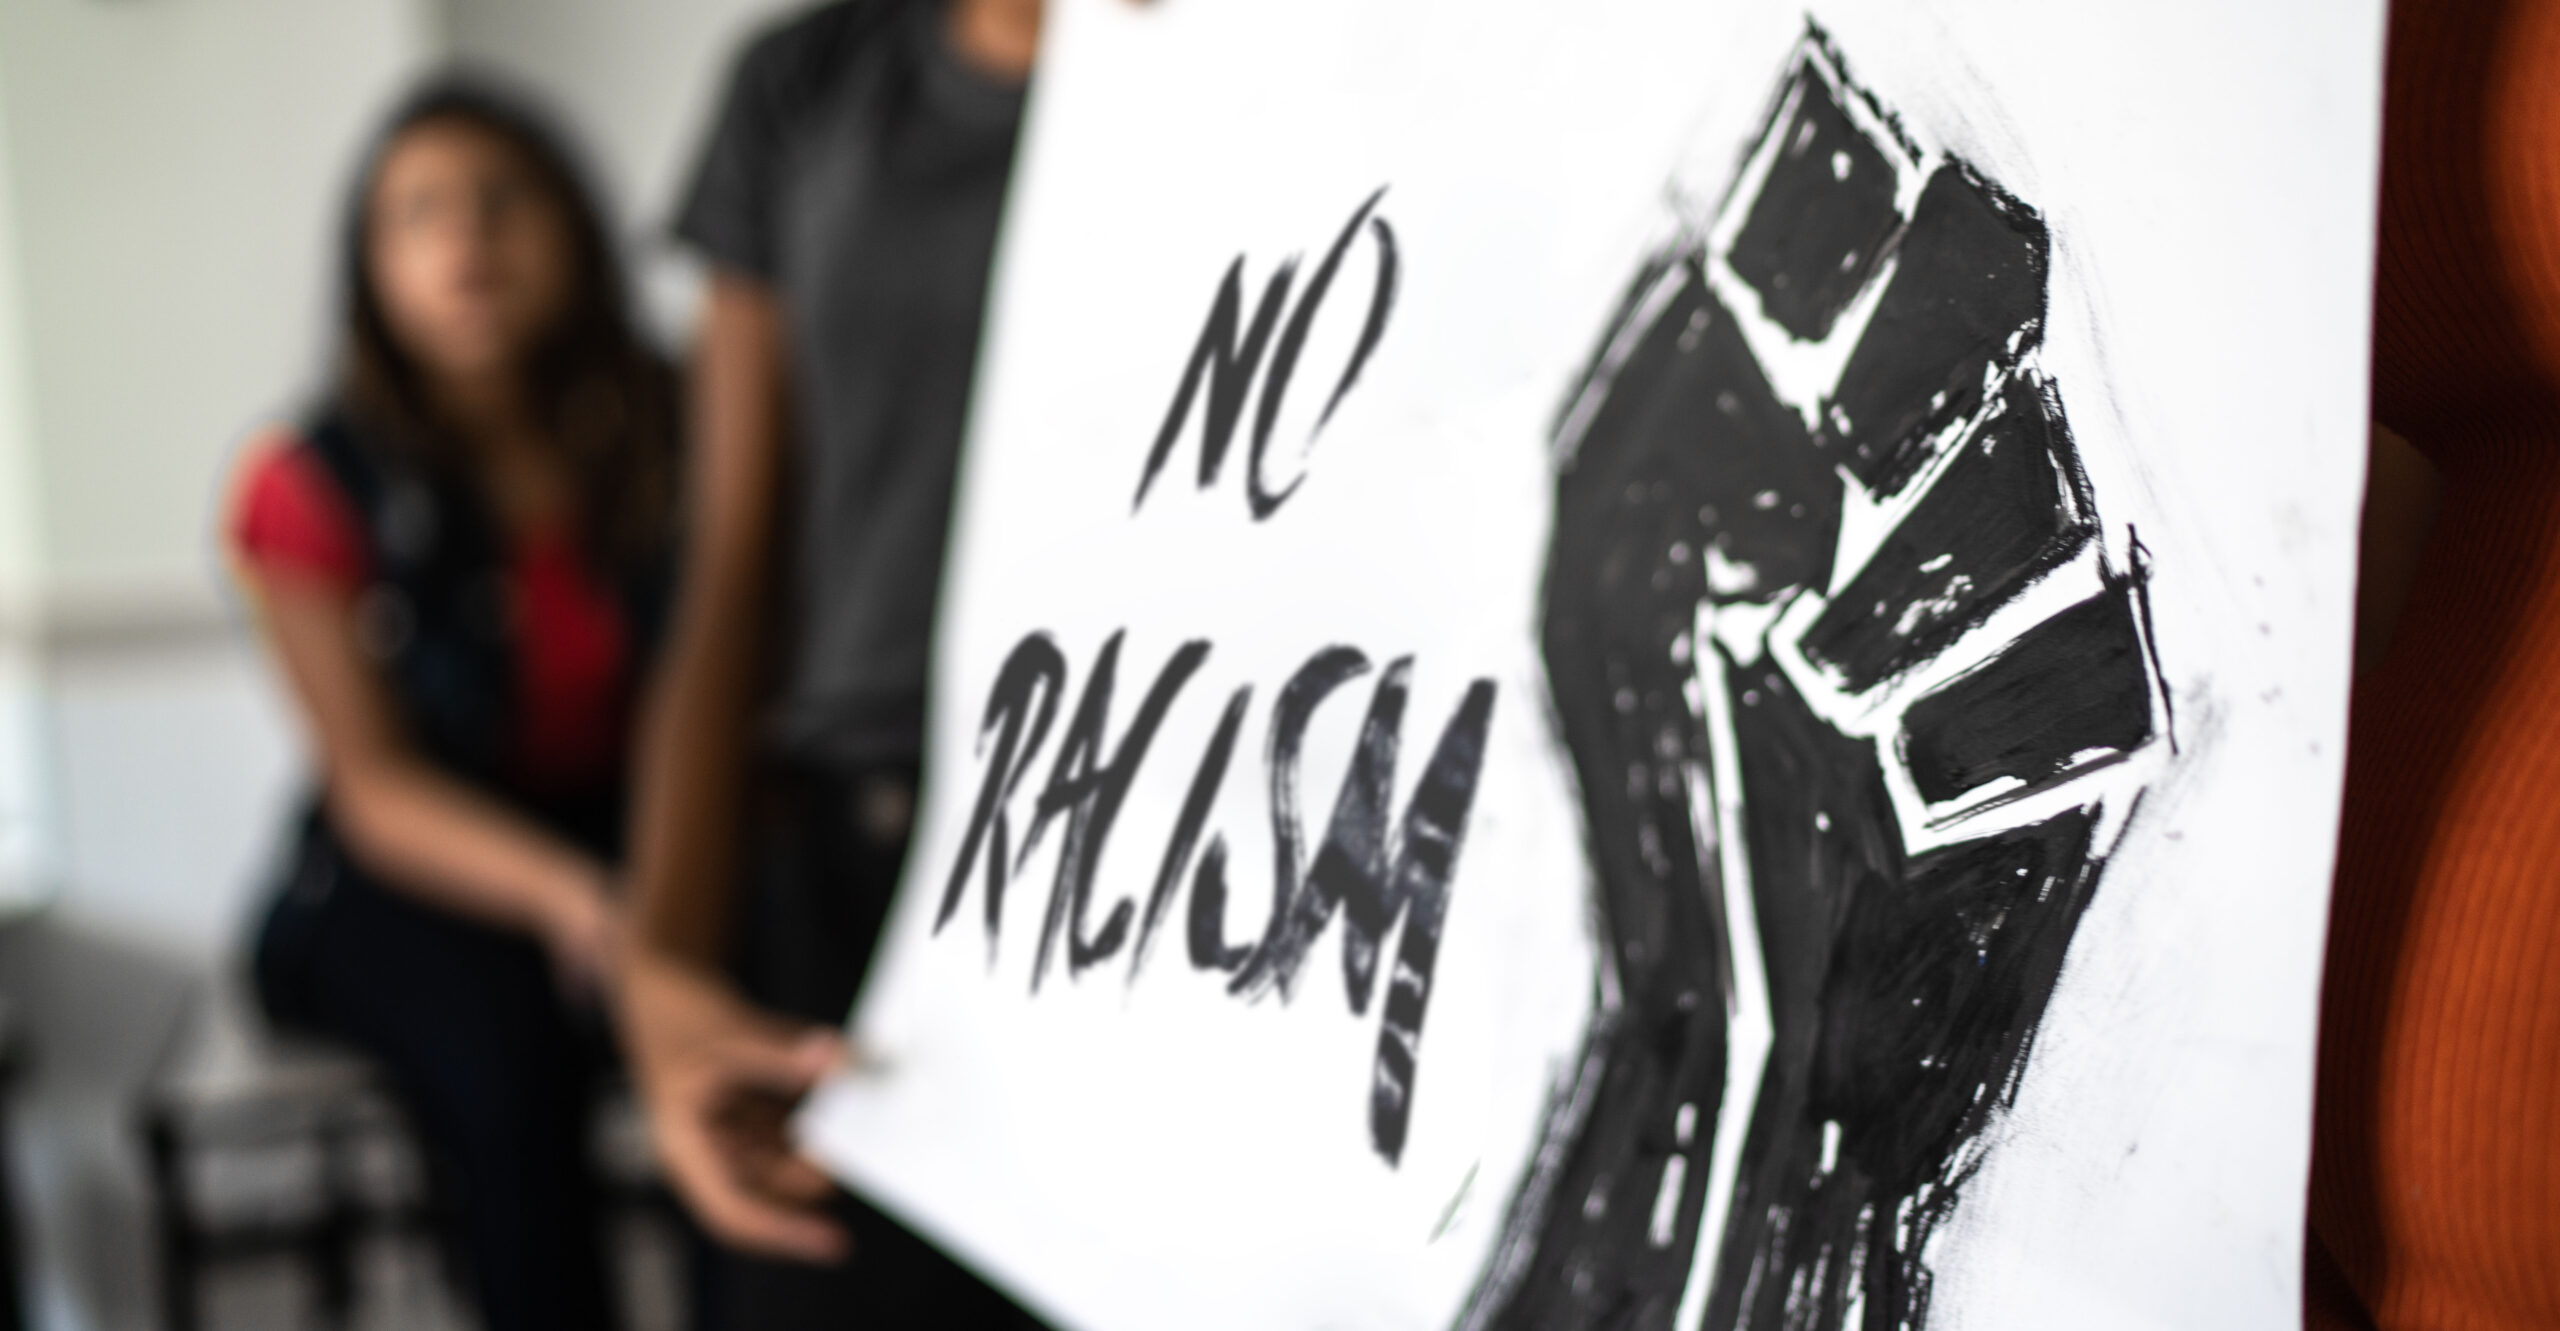 Activists Outline Plan to Push Agenda of Black Lives Matter in Classroom